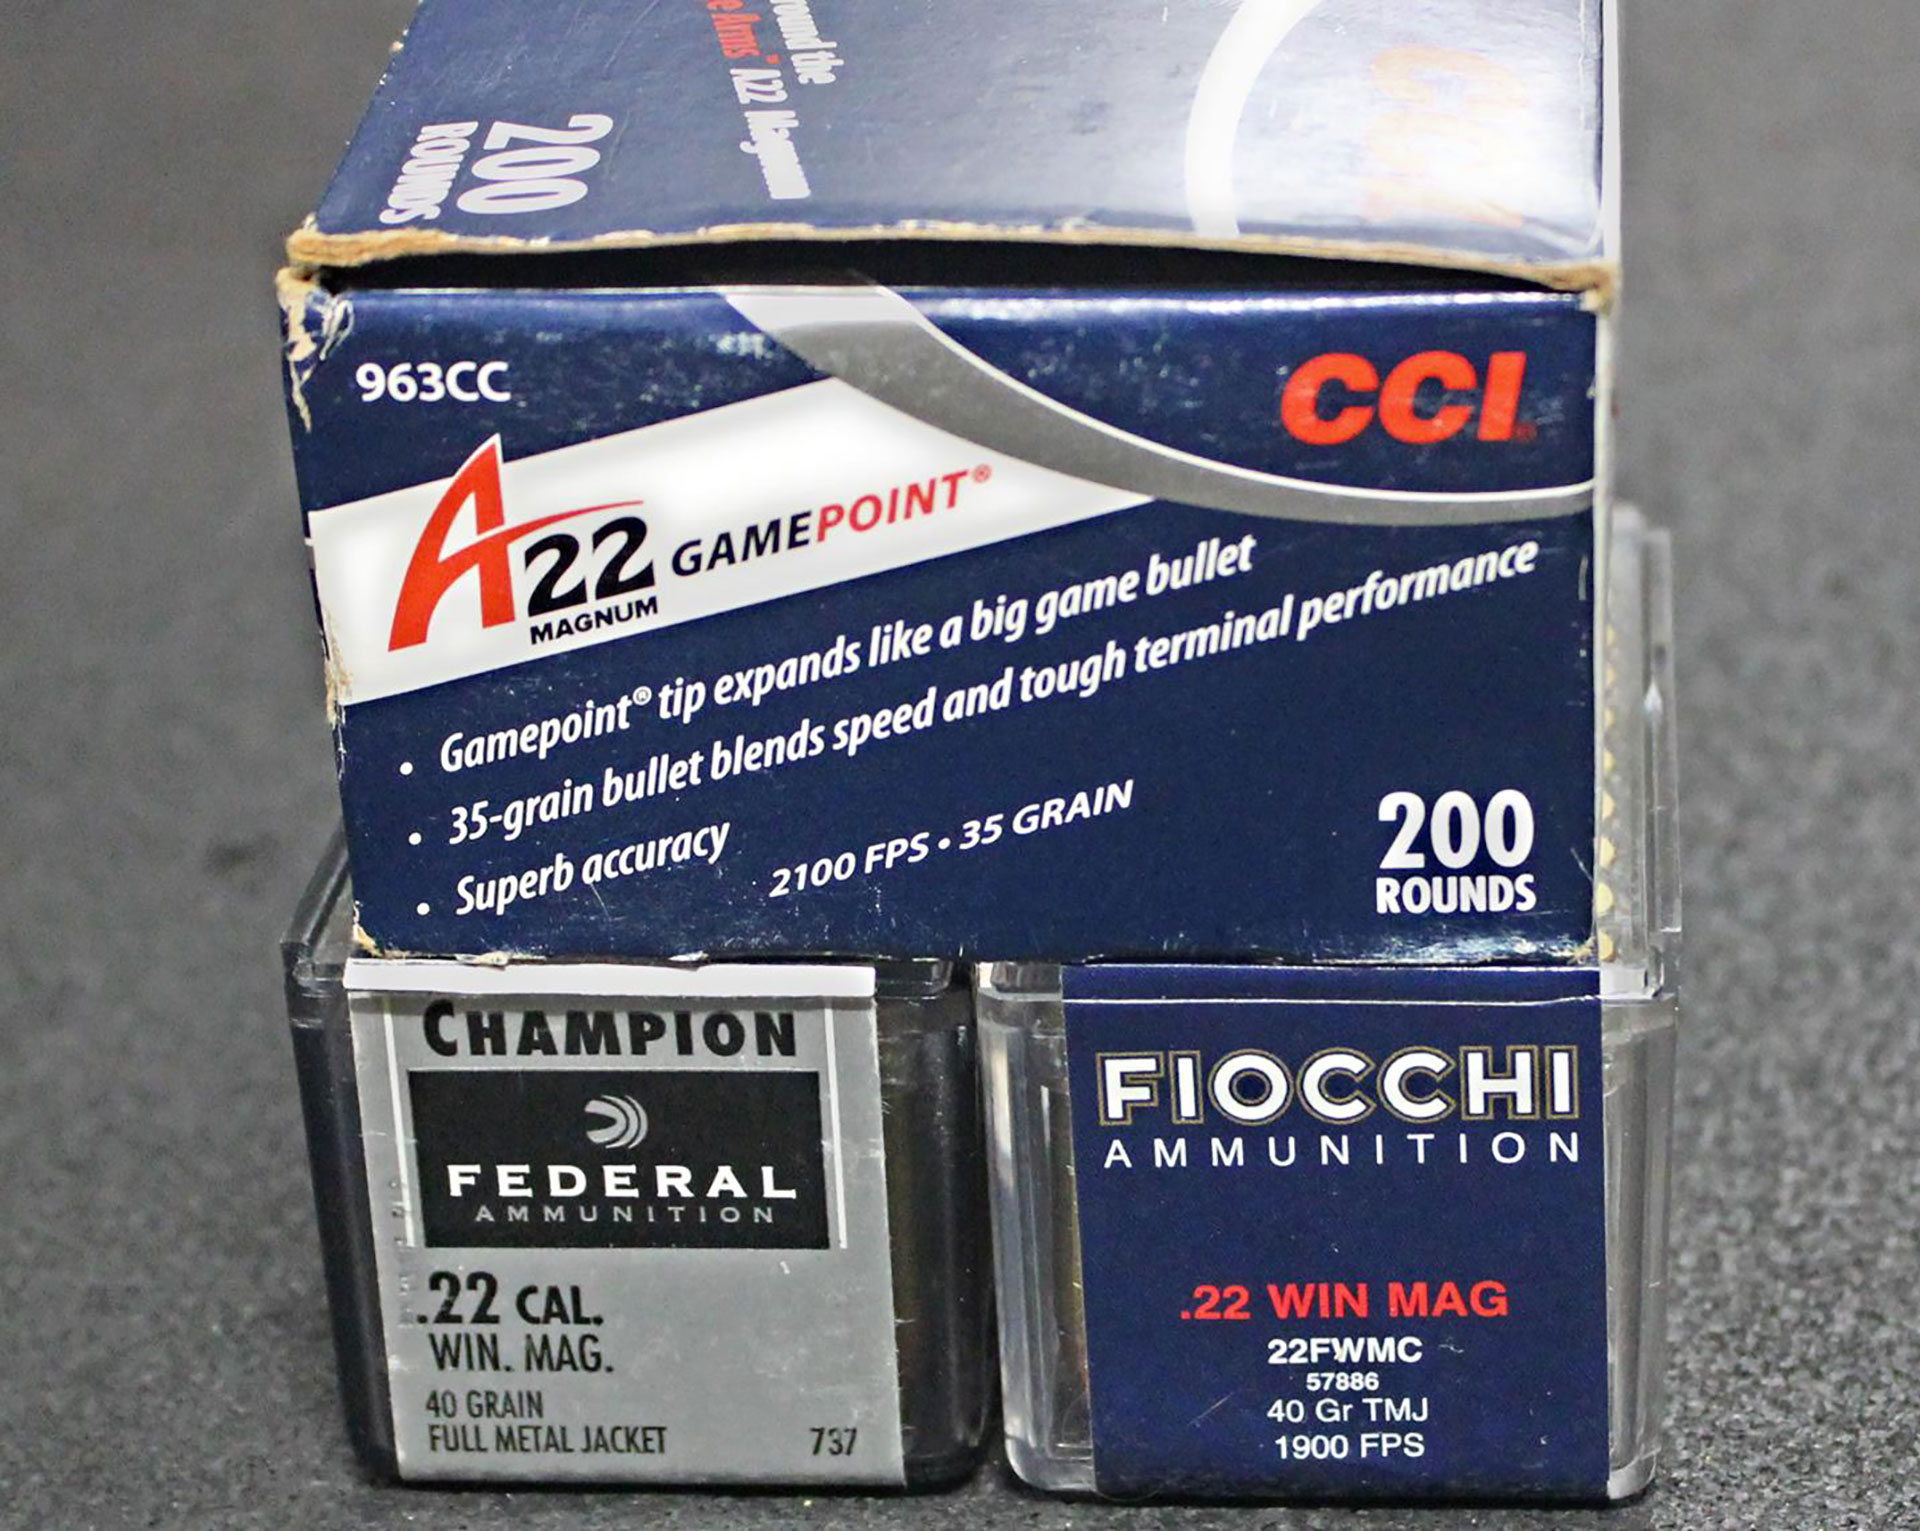 Most of the .22 Mag. loads currently available are designed for small game and varmint hunting. A few defense-grade hollow points designed specifically for revolvers are available.